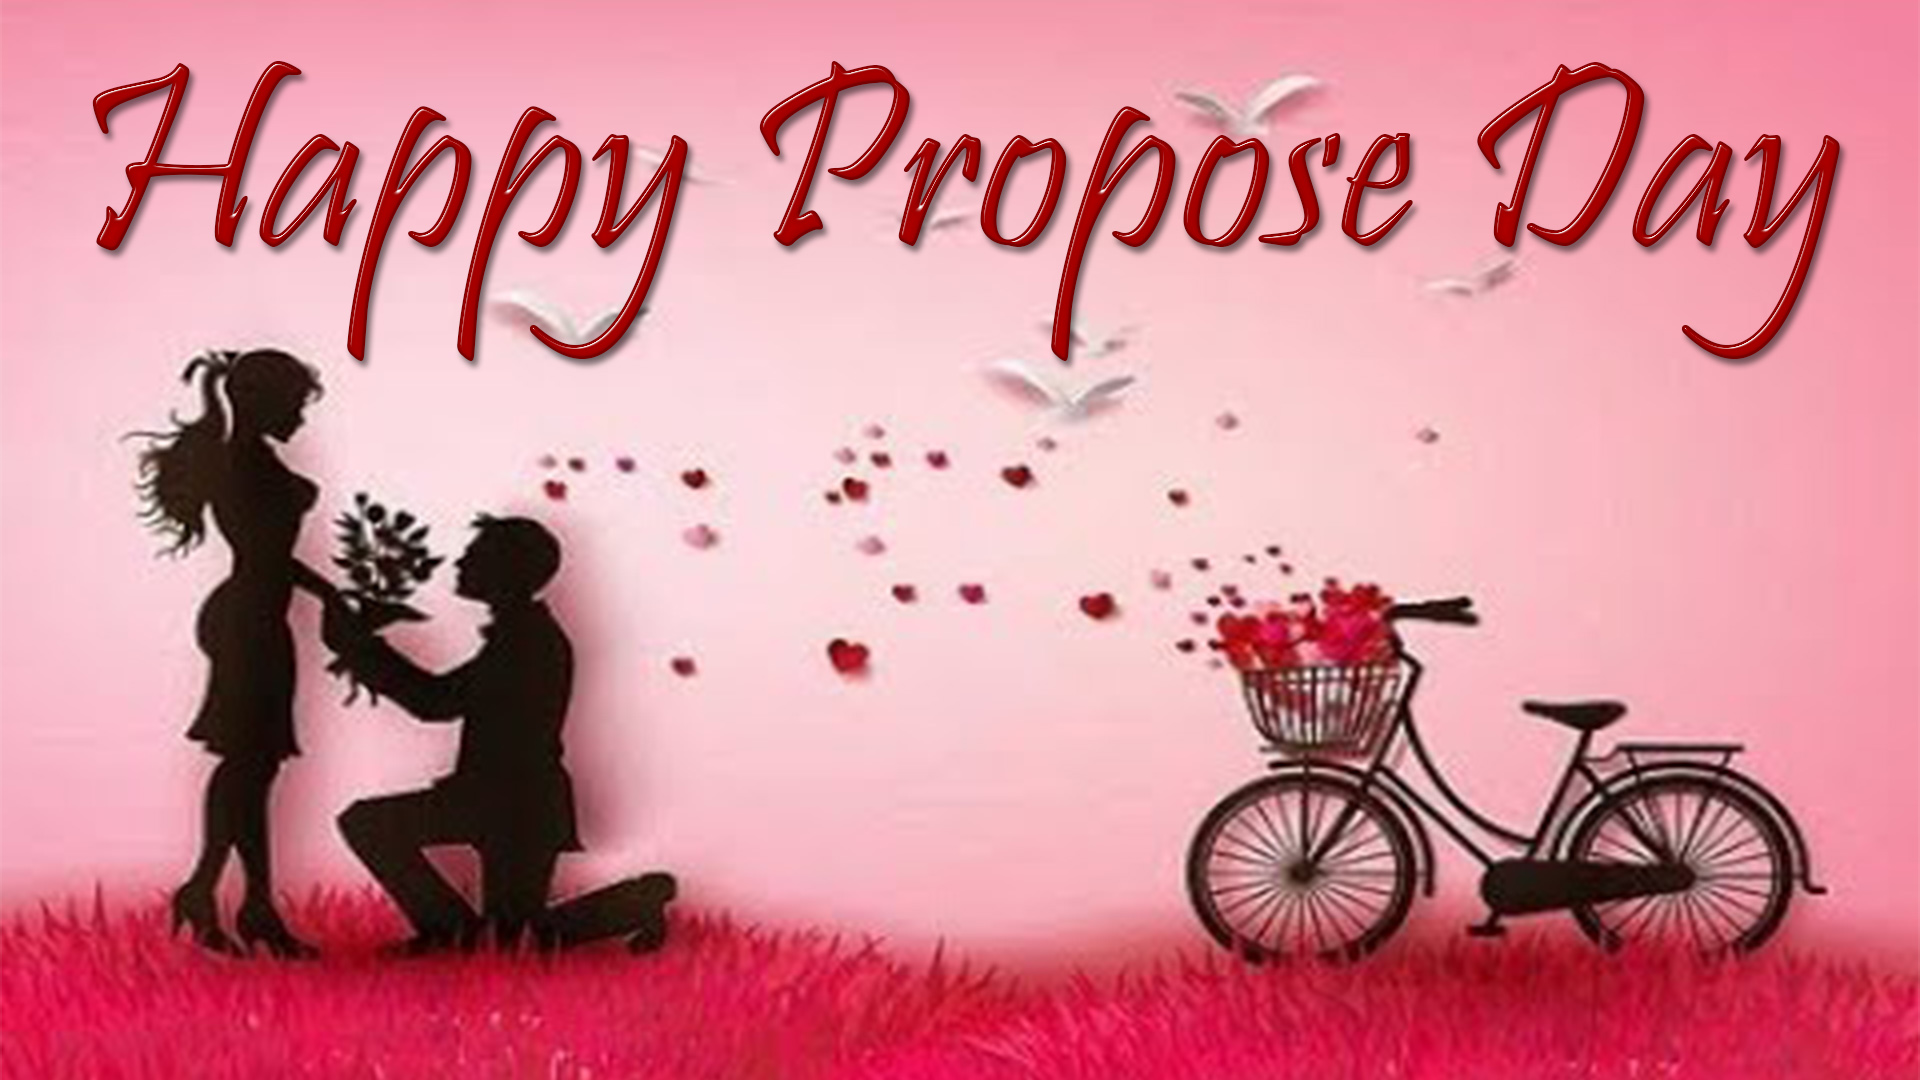 Happy Propose Day Image - Happy Rose Day K , HD Wallpaper & Backgrounds